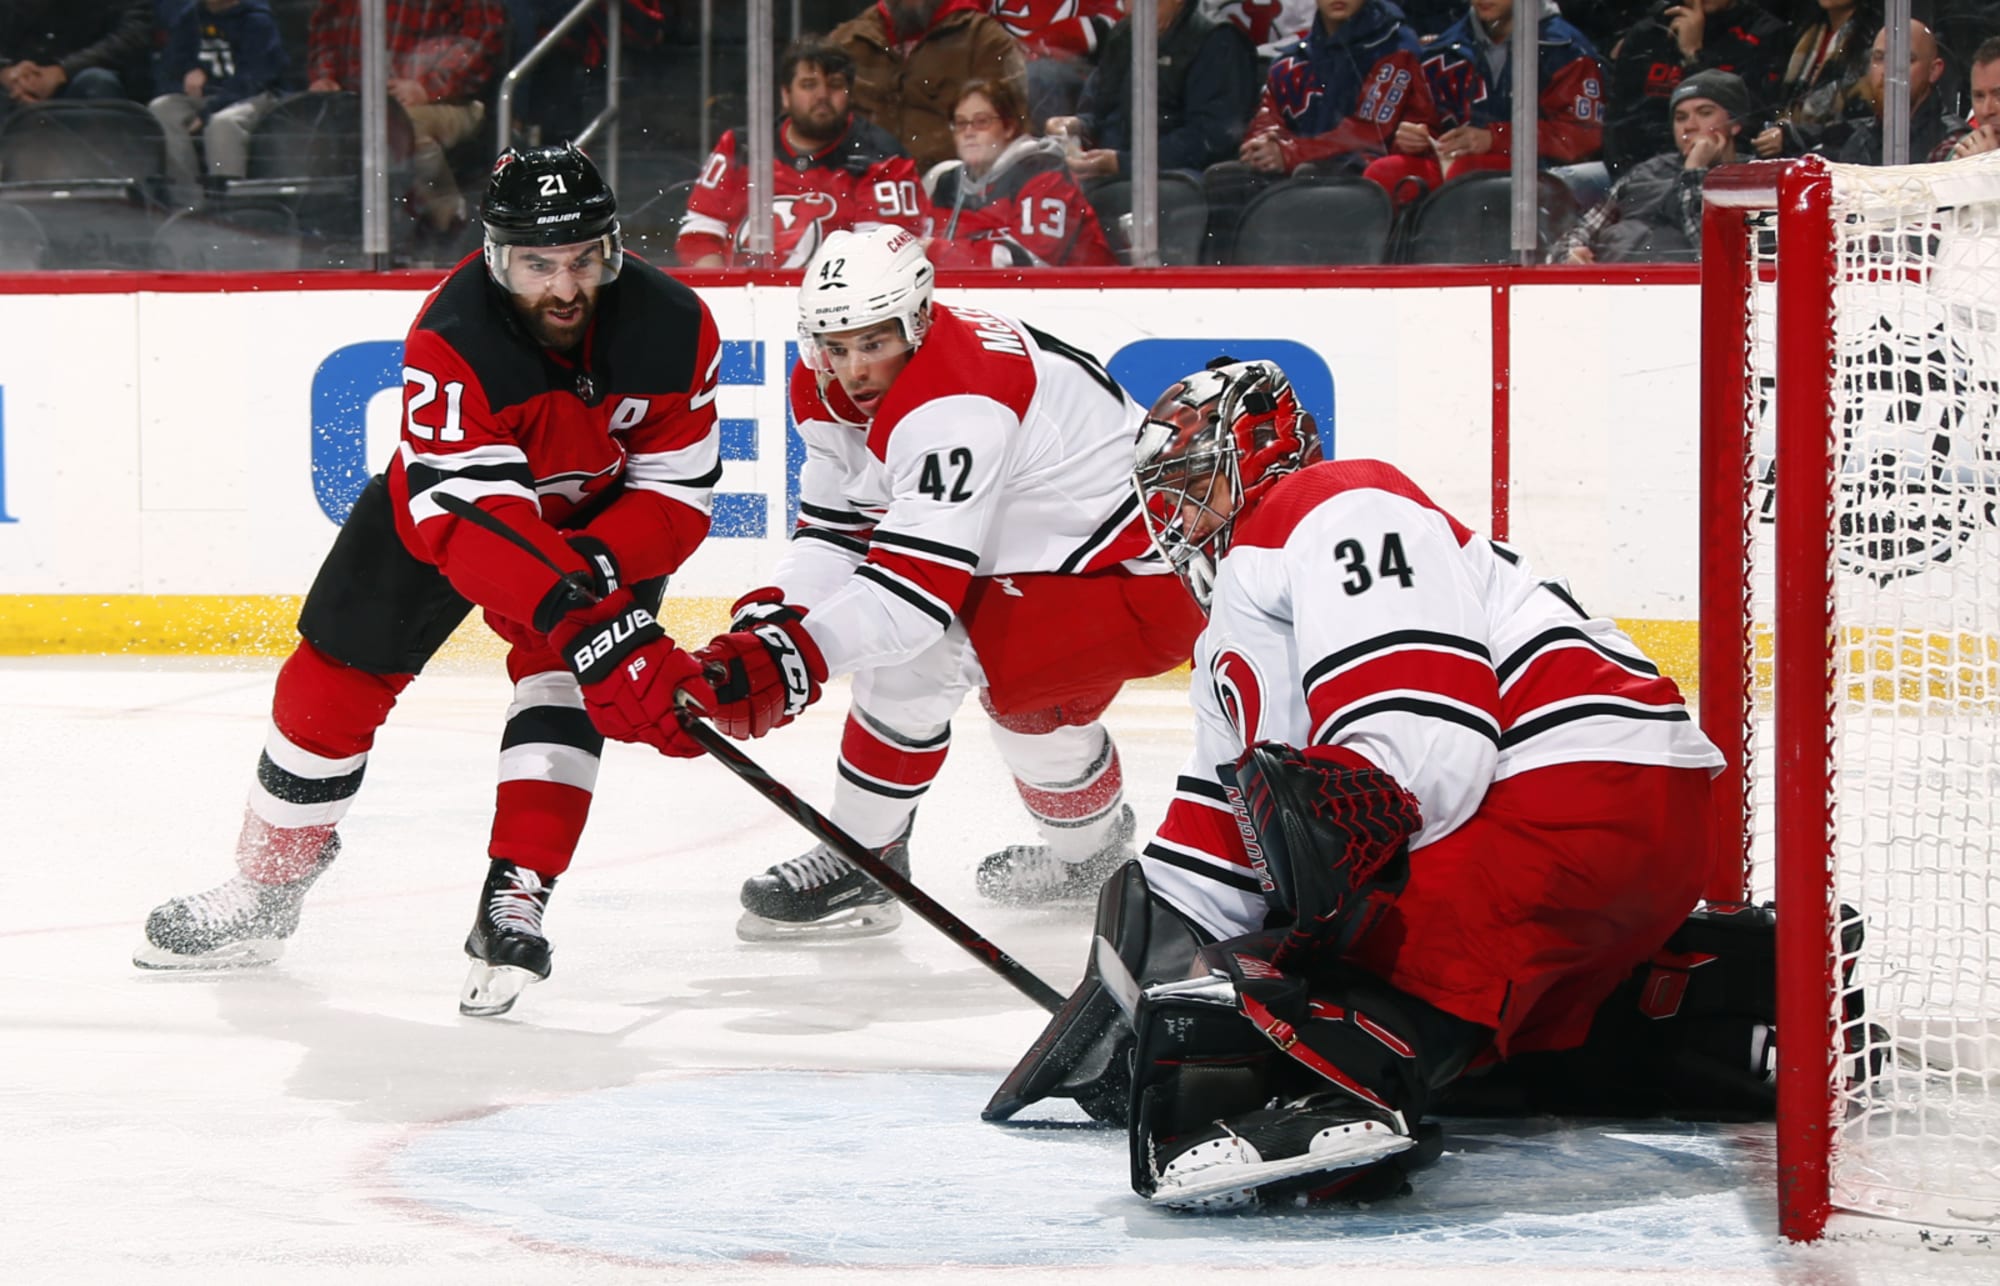 Toronto Maple Leafs at New Jersey Devils - Game #21 Preview